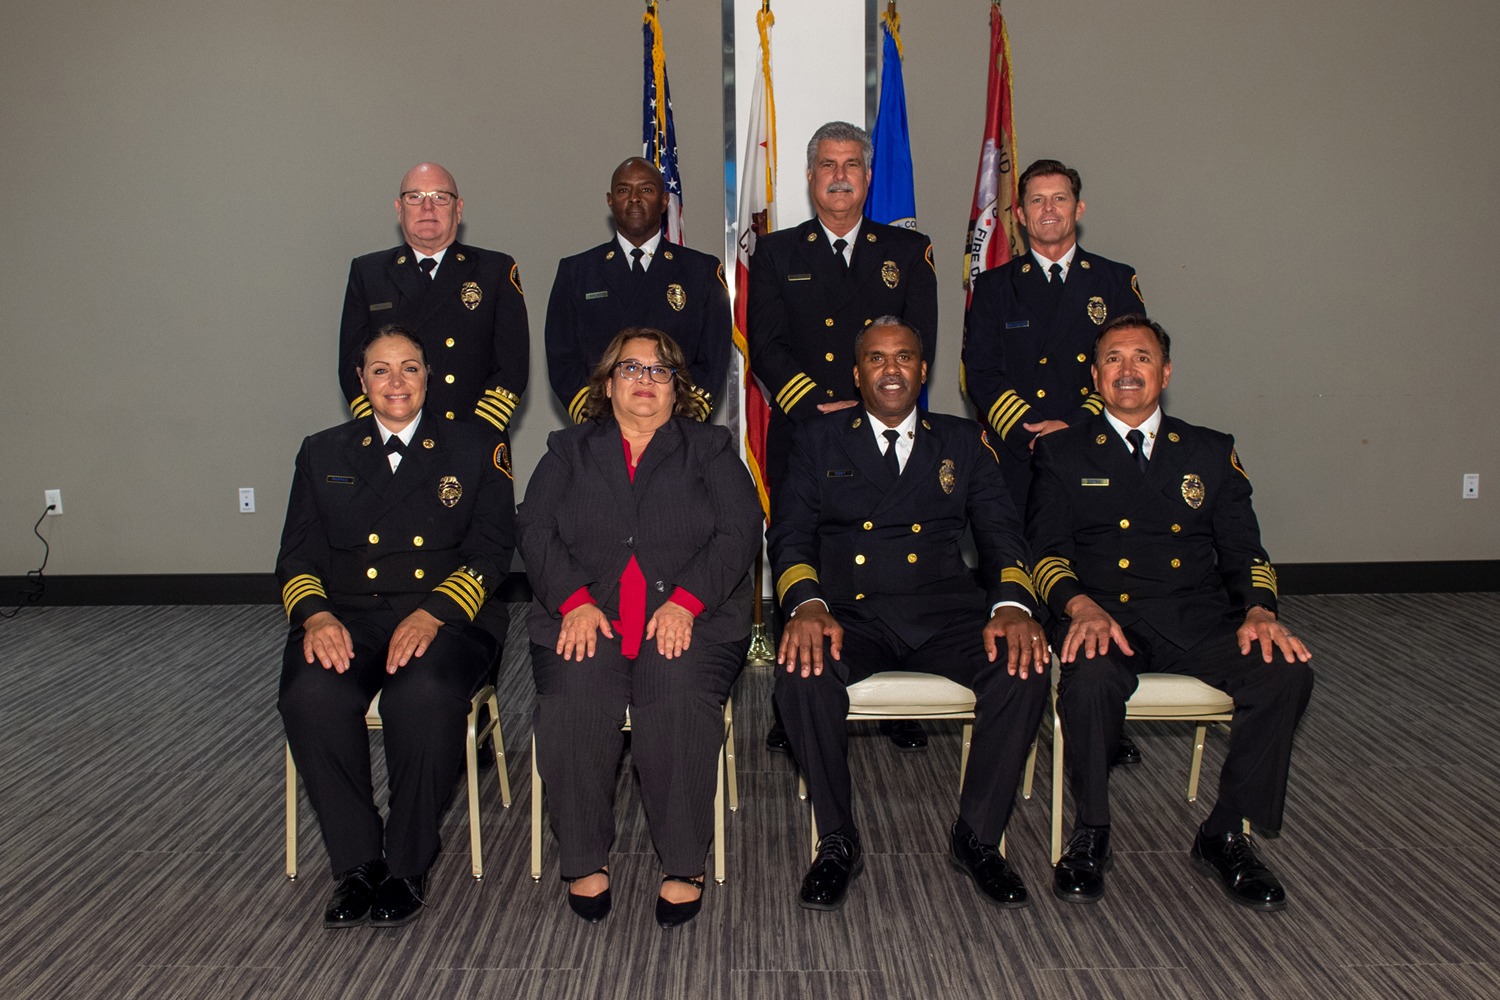 On Wednesday, July 20, 2022, the Los Angeles County Fire Department held a promotional ceremony, honoring 29 dedicated Departmental personnel at the MAYNE Events Center in Bellflower.